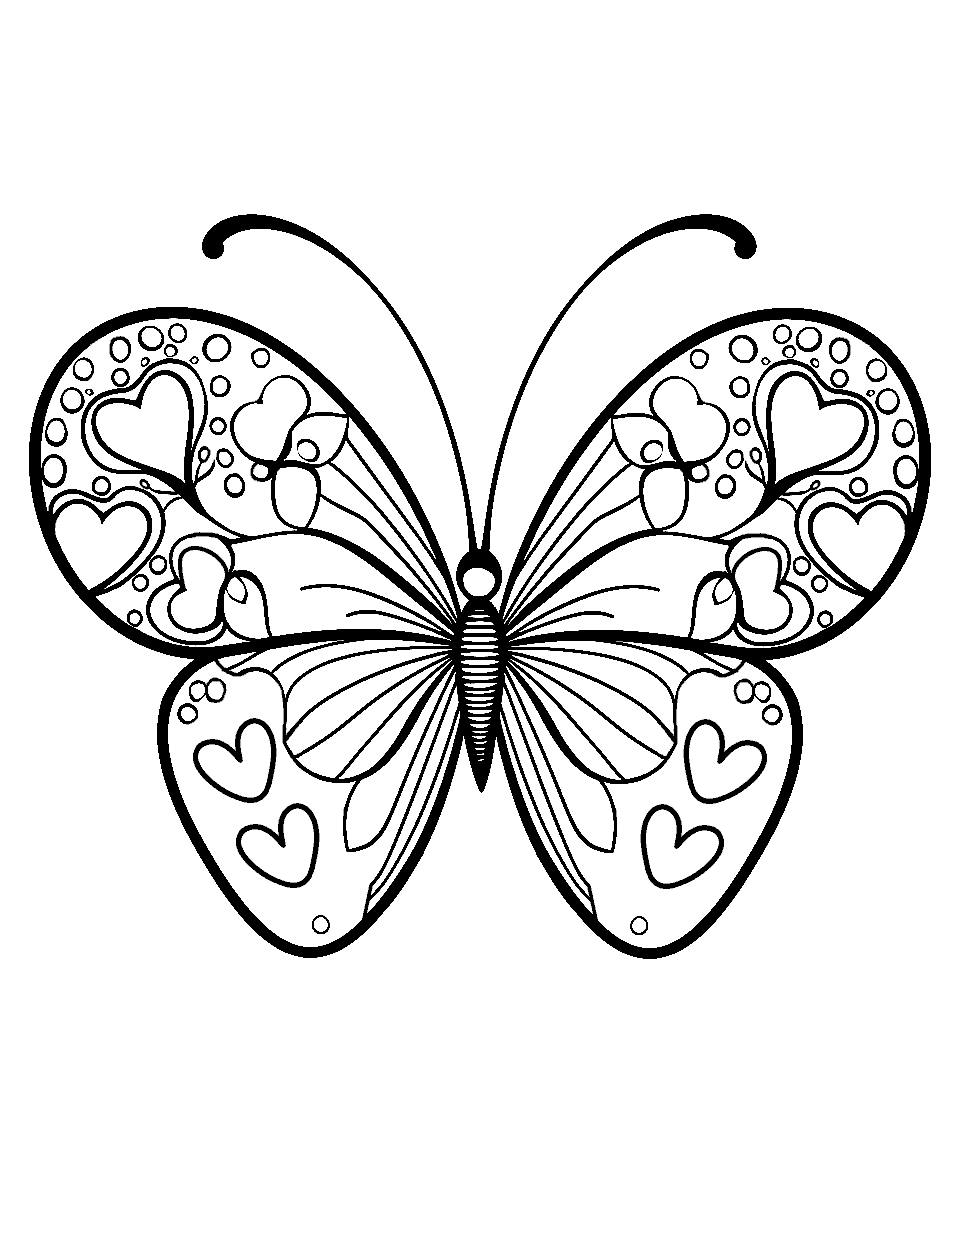 Butterfly with Heart Wings Coloring Page - A delicate butterfly with wings shaped like hearts and heart-shaped spots on it.